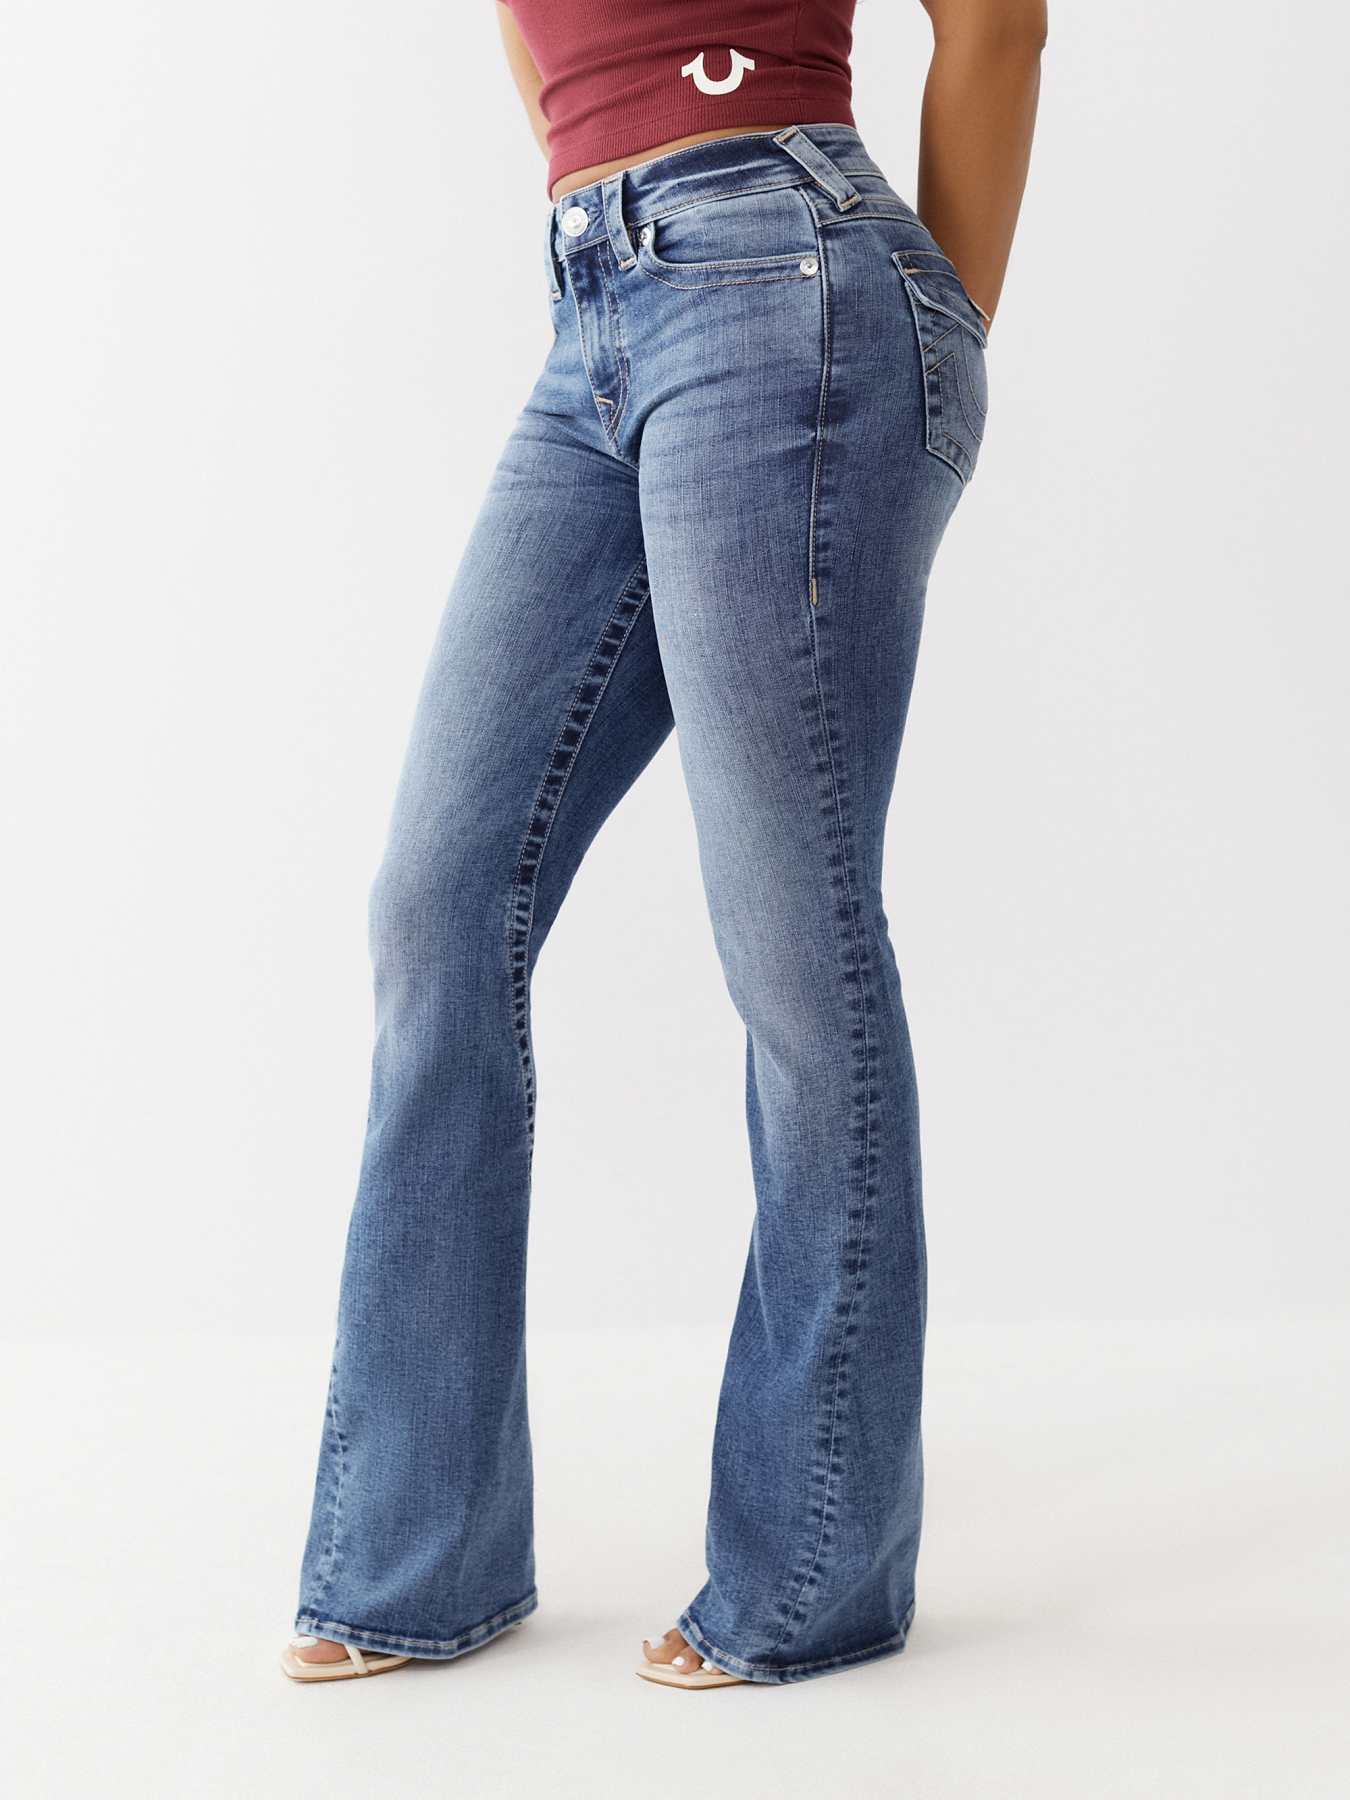 NEW Tall Women's Jeans - 34 Mid-Rise Flare Jean - 26 (2) / Ladies' 34